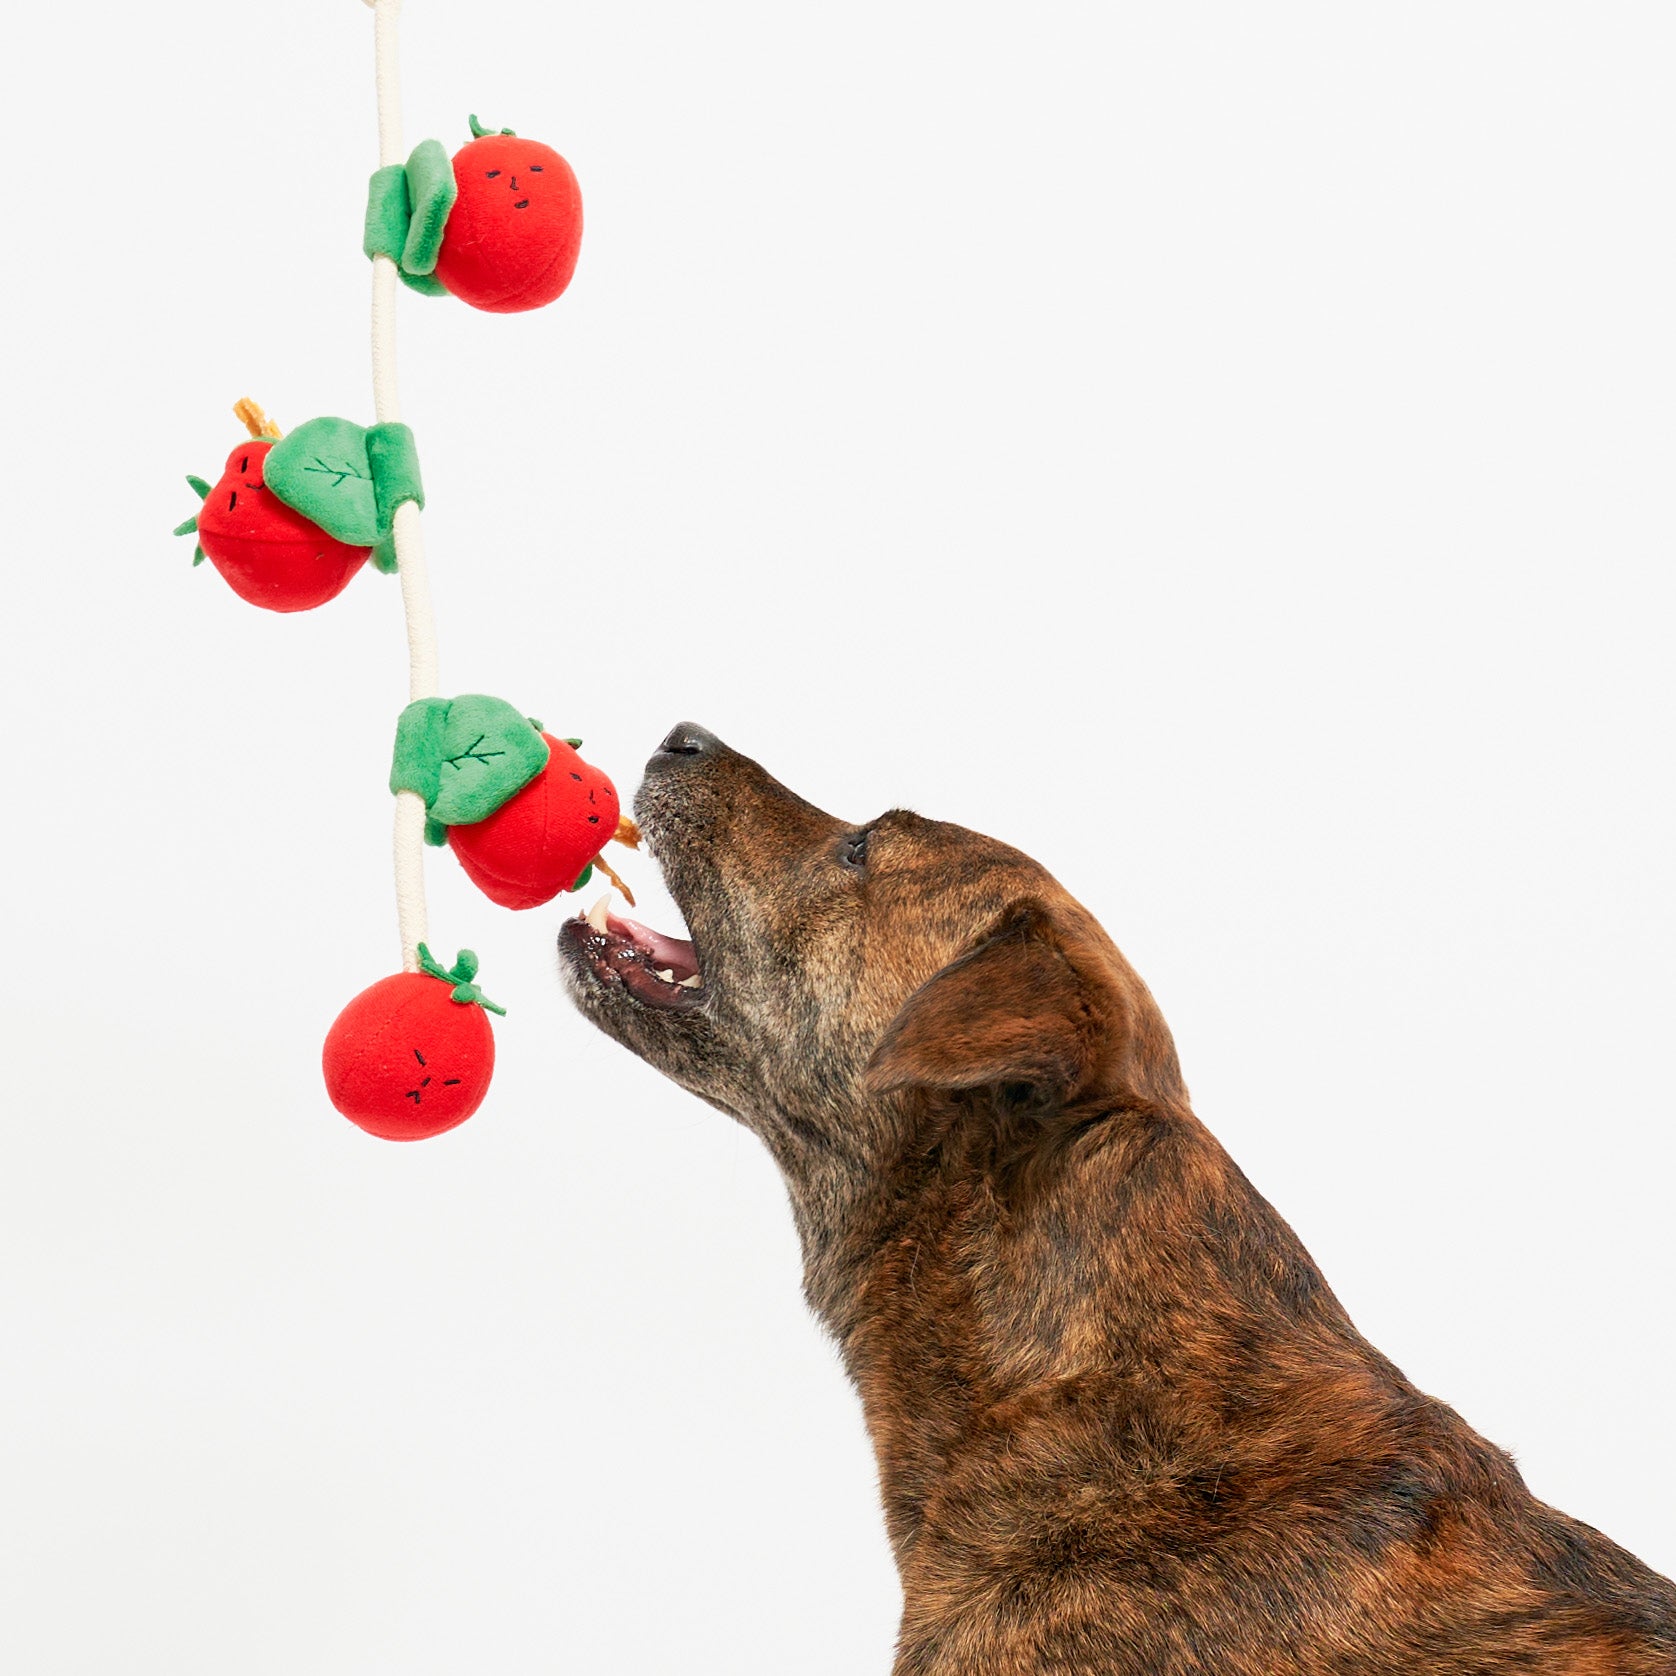  In this image, a brindle-coated dog is shown interacting with the same string of plush tomatoes. The dog is looking upward, its mouth open as if to catch or play with one of the tomatoes. This scene is likely another depiction of a pet engaged in play, enjoying the movement and tactile experience of the toy. The dog's expression is one of focus and excitement, a common sight when dogs are presented with toys that stimulate their senses and instincts.